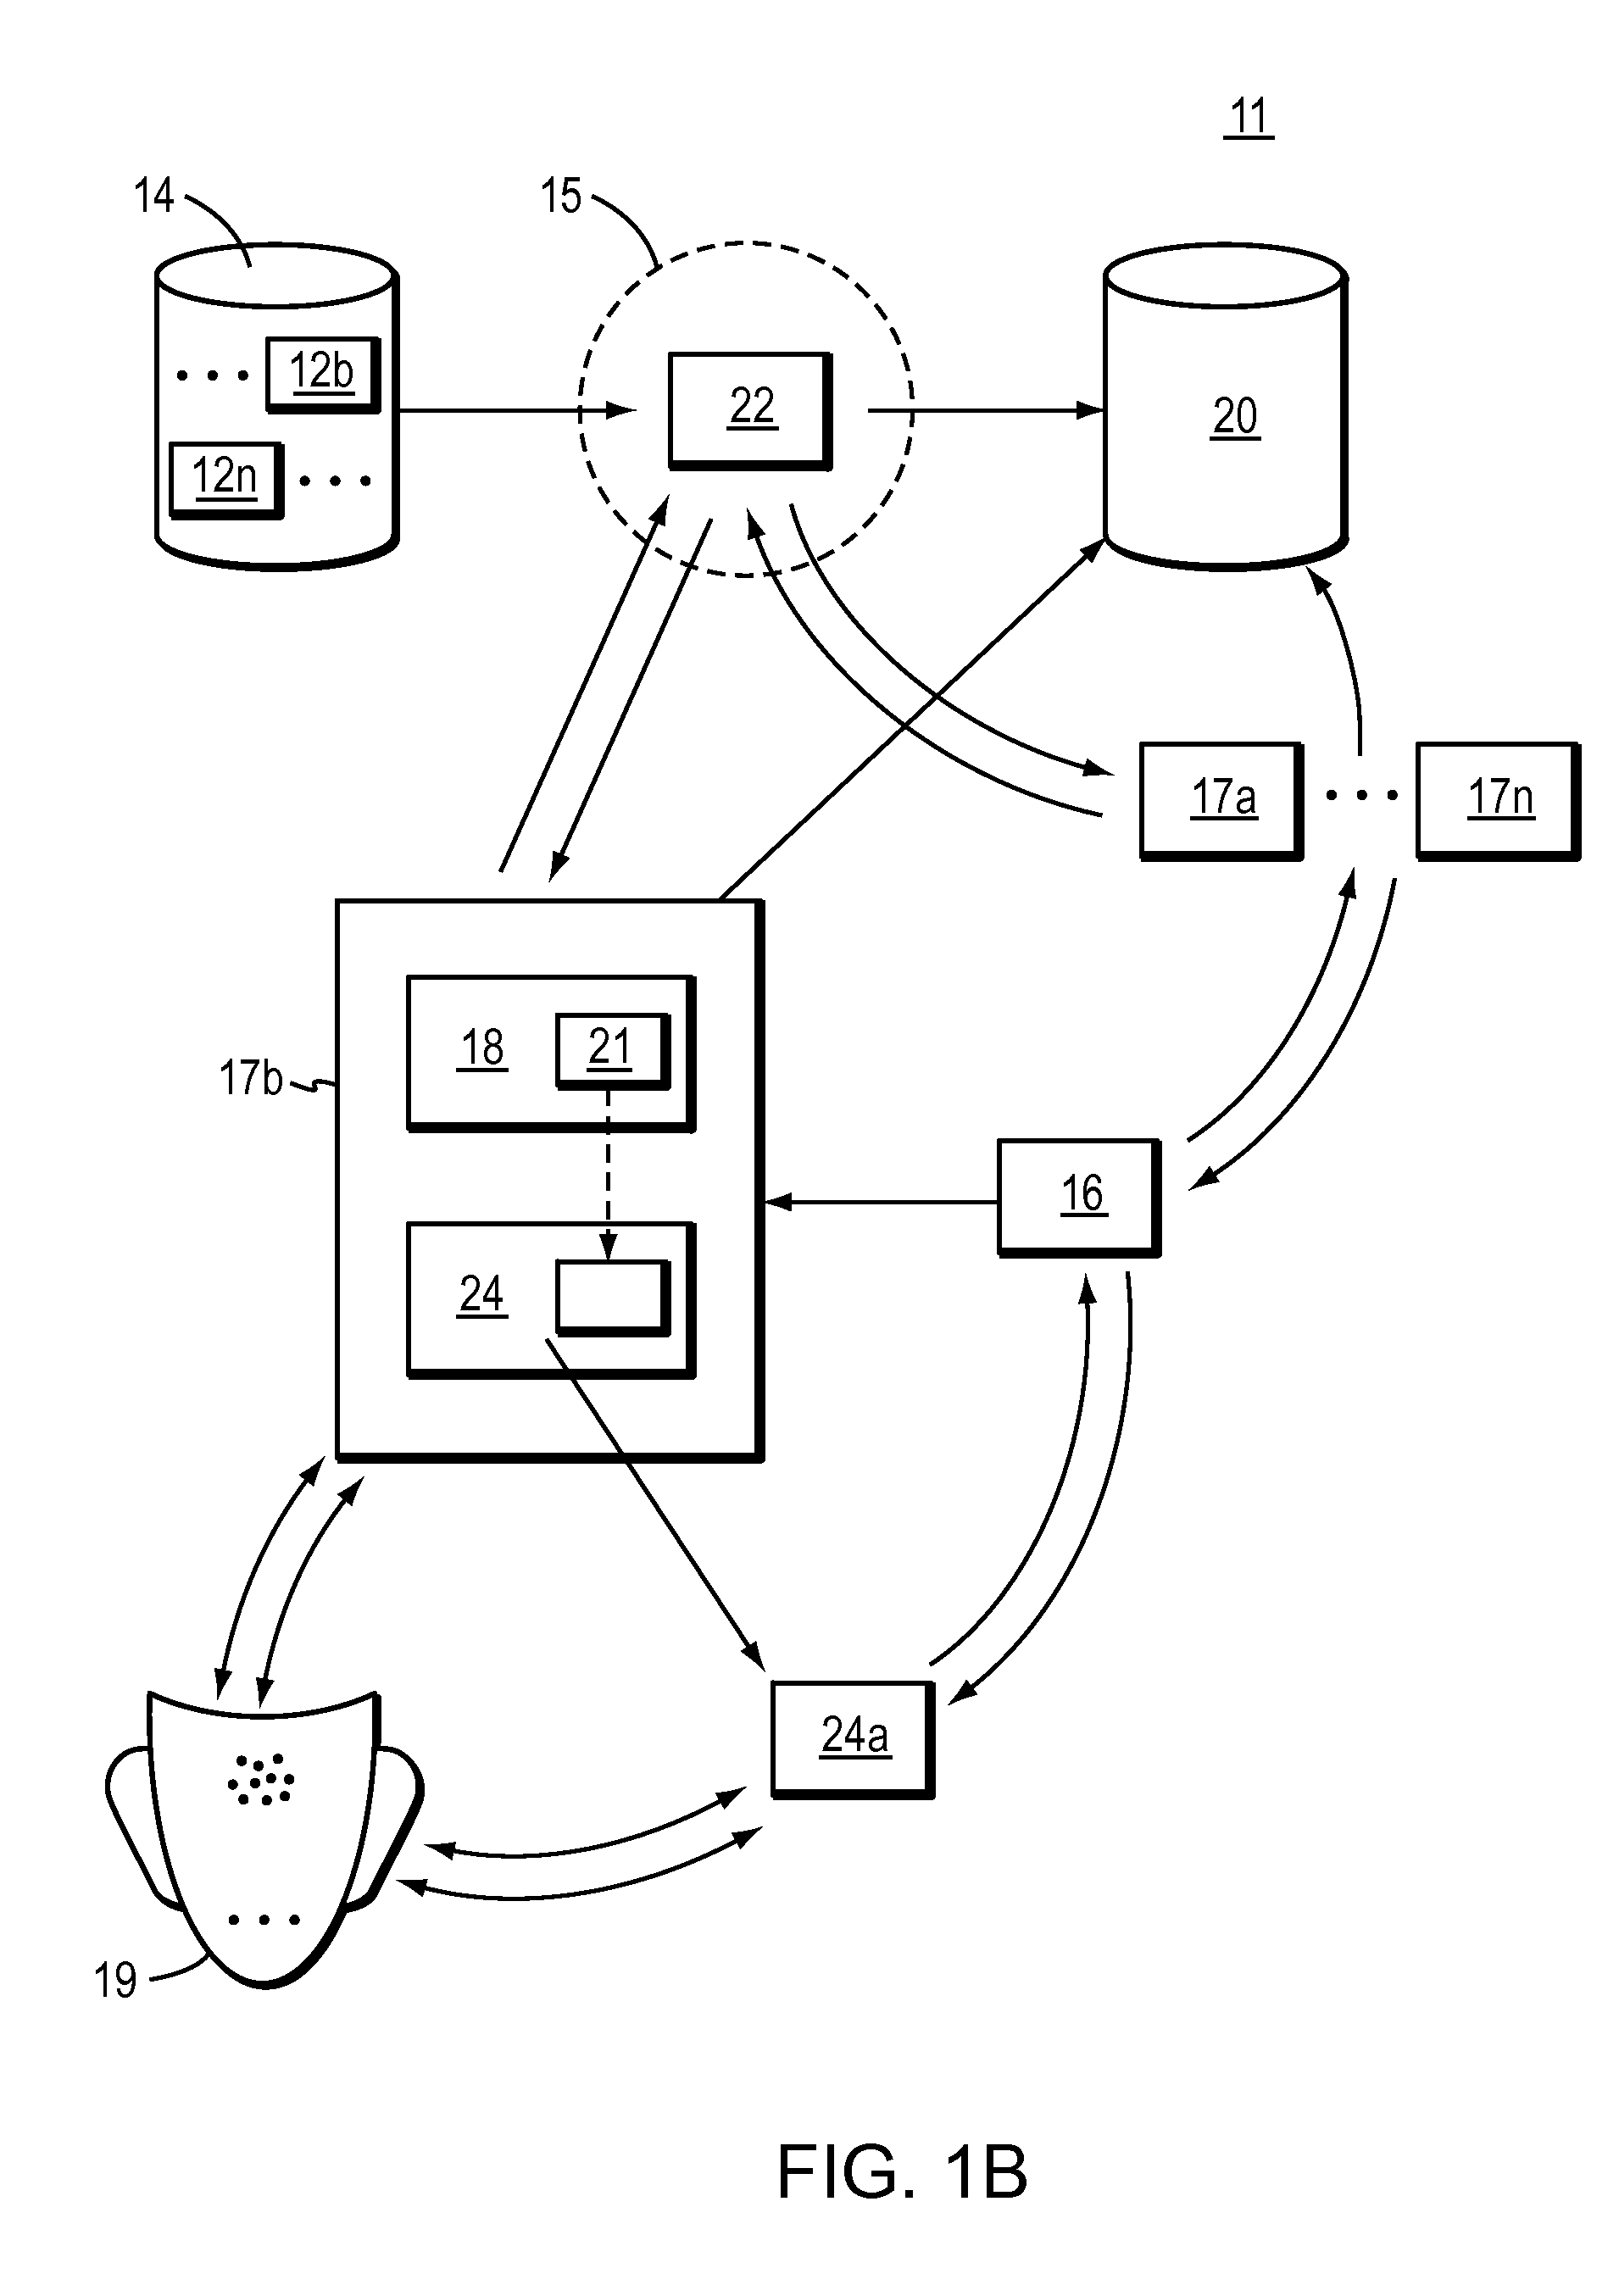 Method and Apparatus for Displaying Interactions With Media by Members of a Social Software System